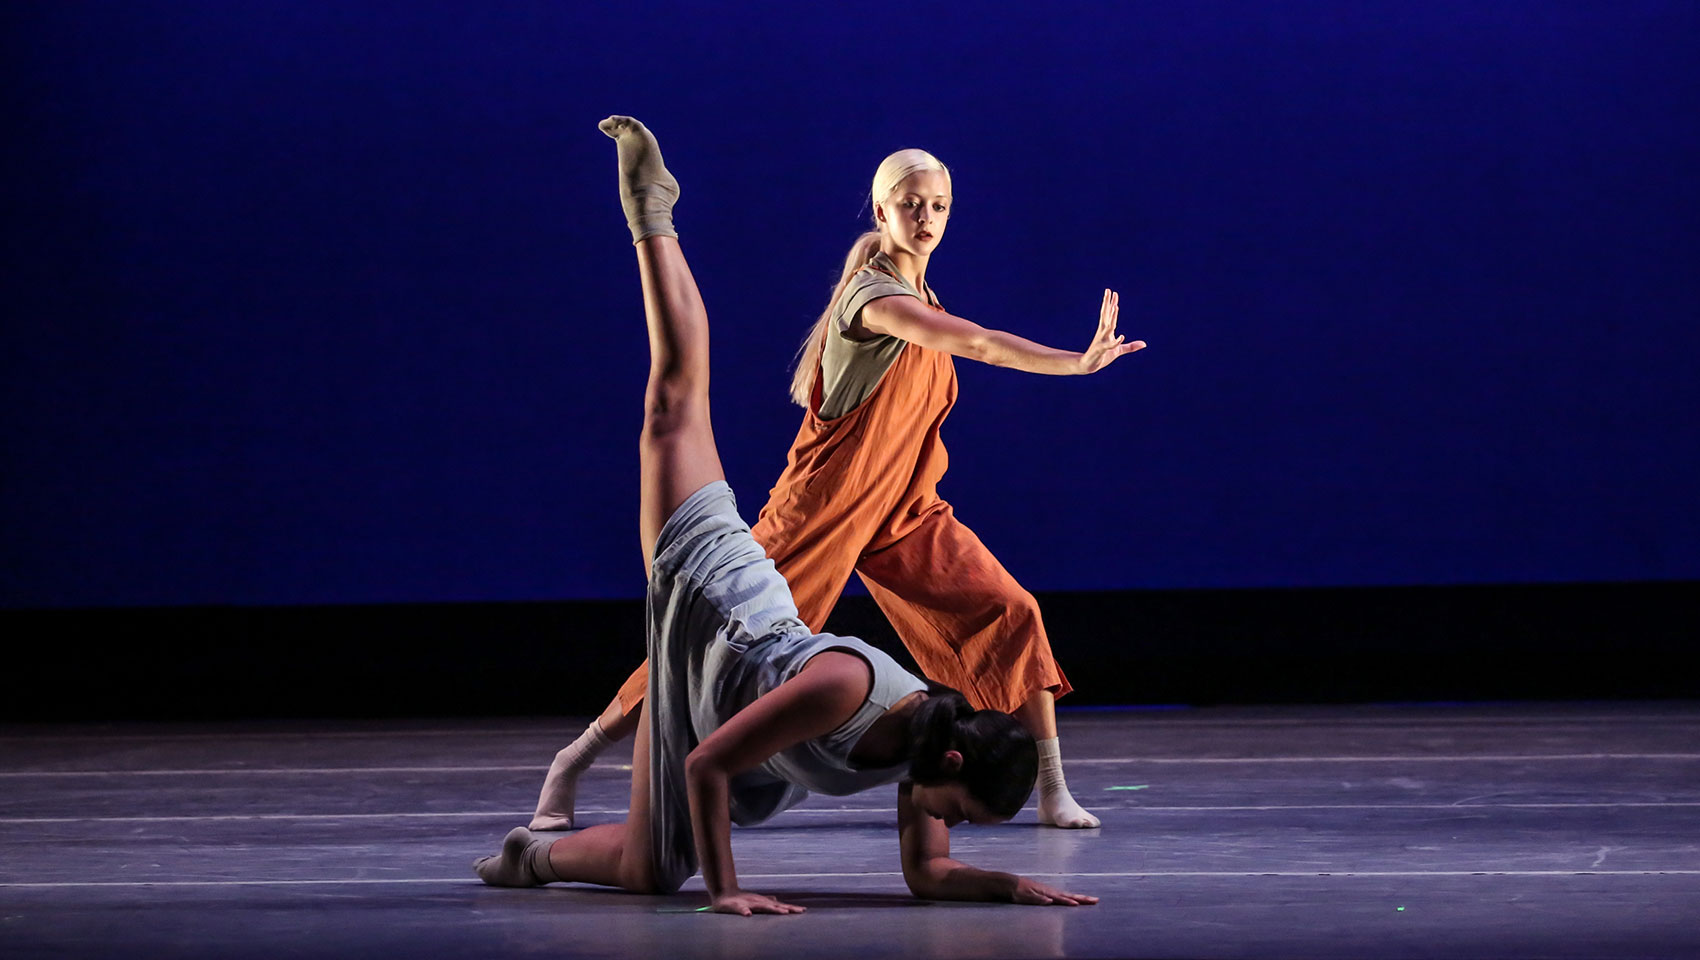 Two women dancers on stage, one supports herself on the ground with her arms and extends her leg straight upward.